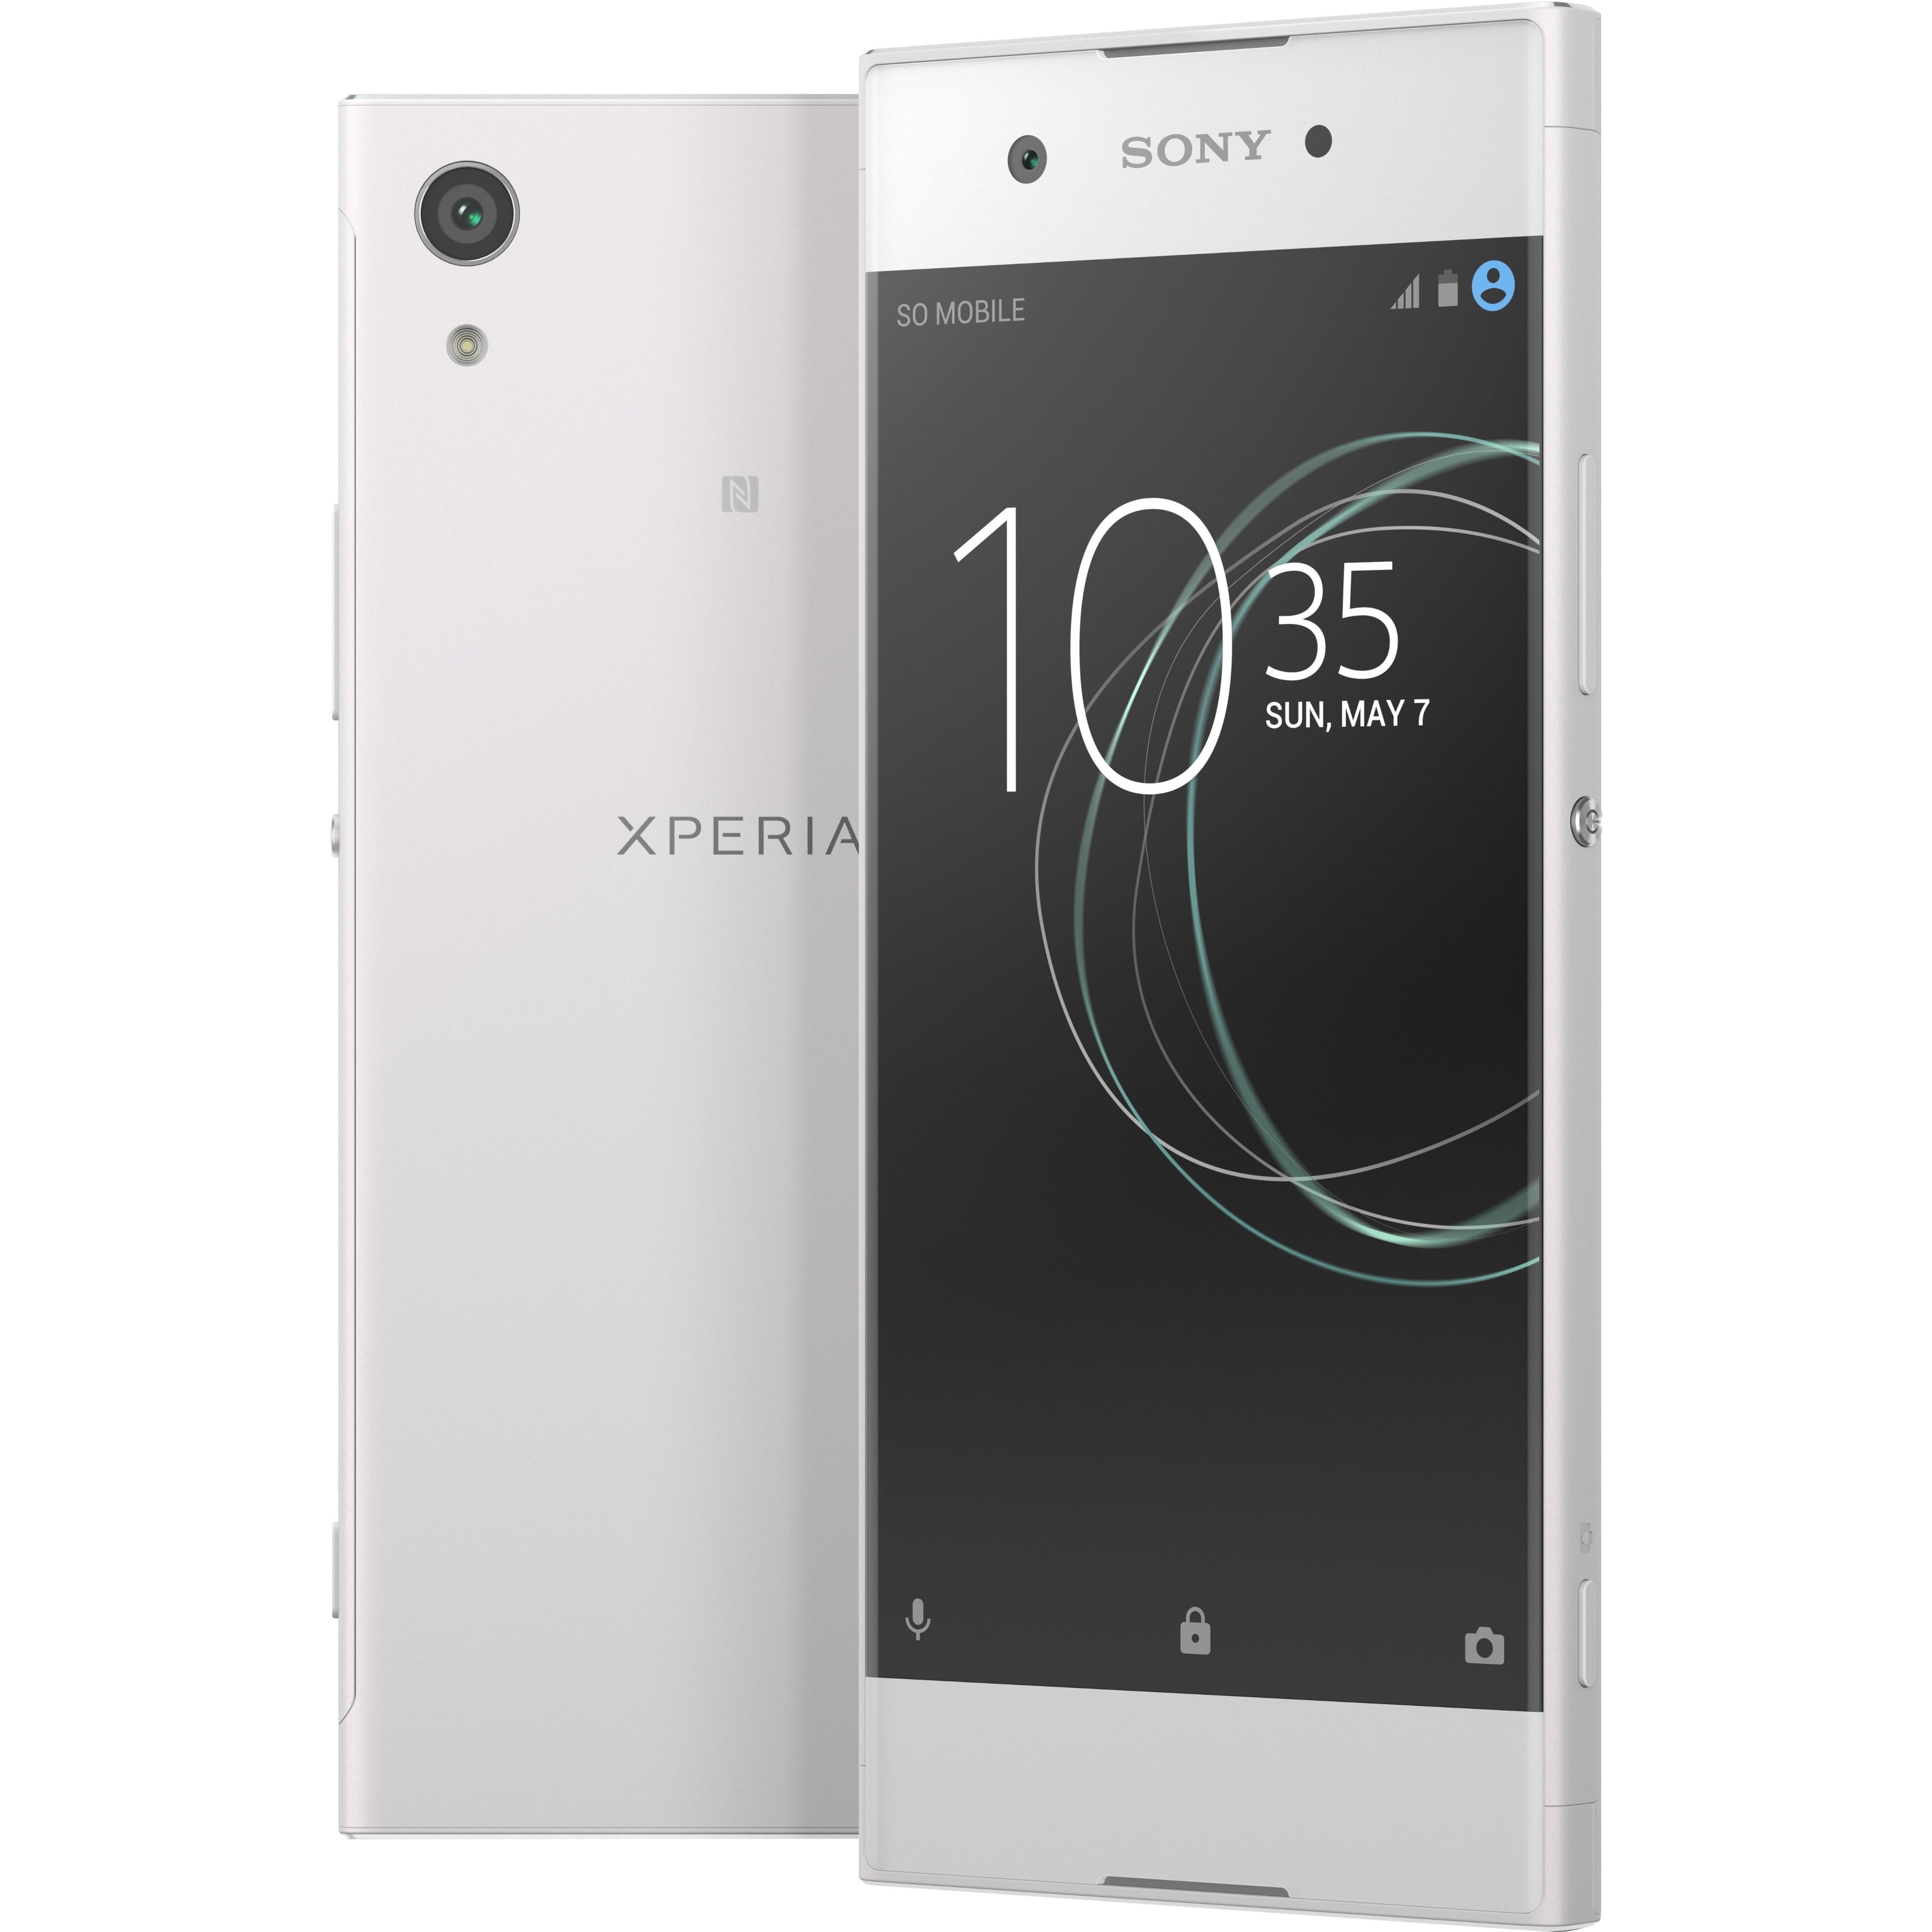 Sony Mobile Sony Xperia XA1 Ultra G3223 32 GB Smartphone, 6 LCD Full HD  1920 x 1080, Octa-core (8 Core) 2.30 GHz, 4 GB RAM, Android 7.0 Nougat, 4G